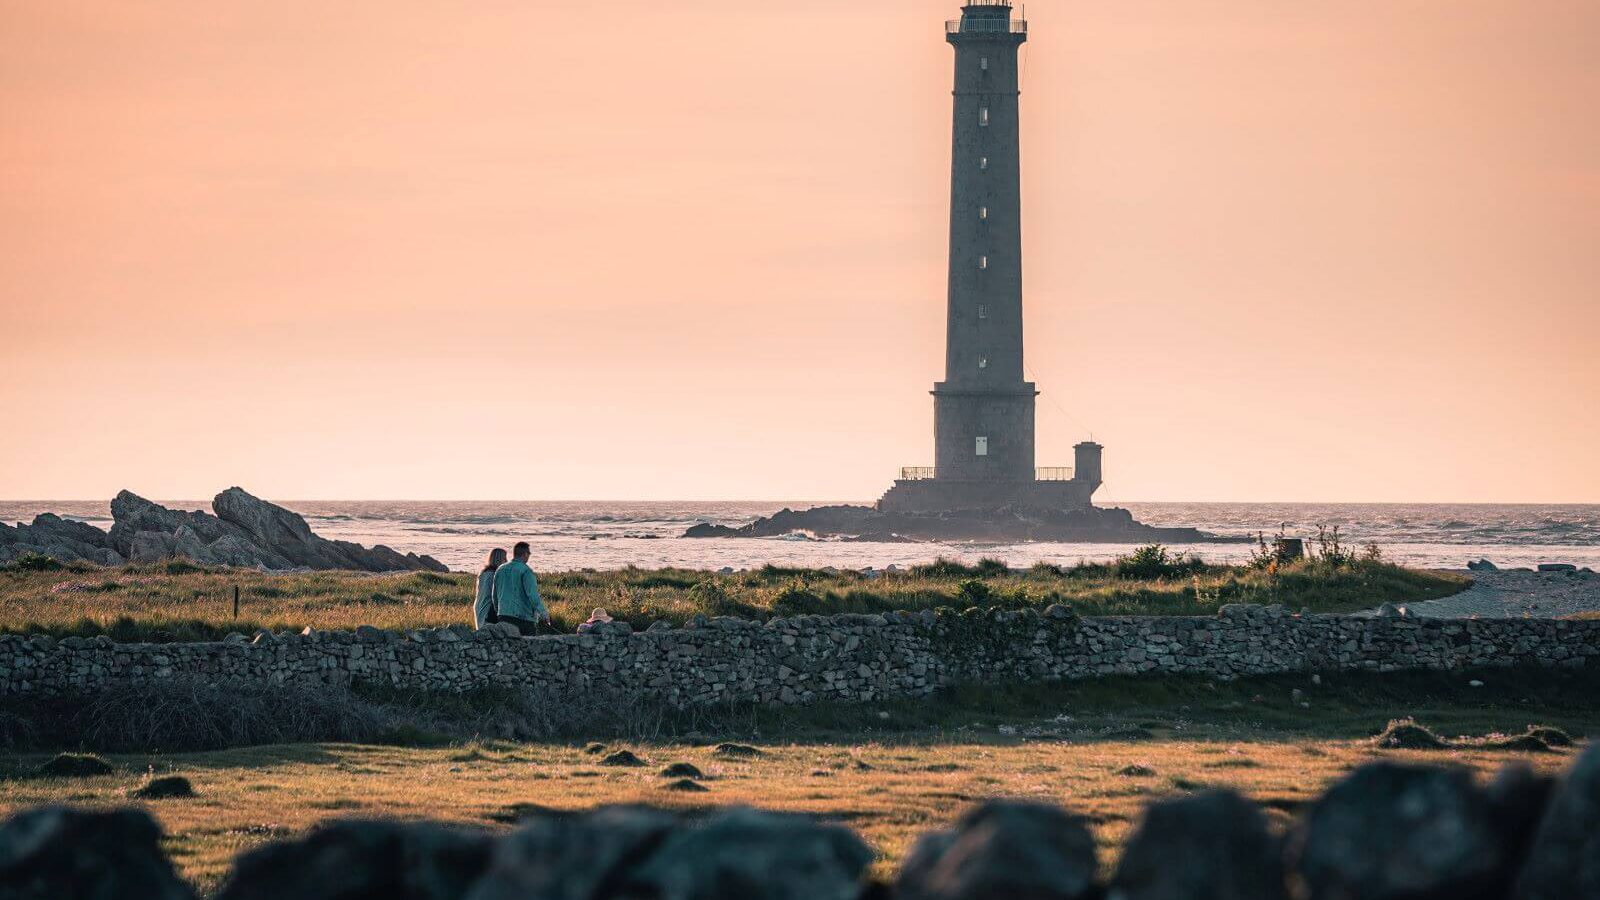 Phare_de_Goury_-_T._Verneuil-Teddy_VERNEUIL-1600px-1600x900